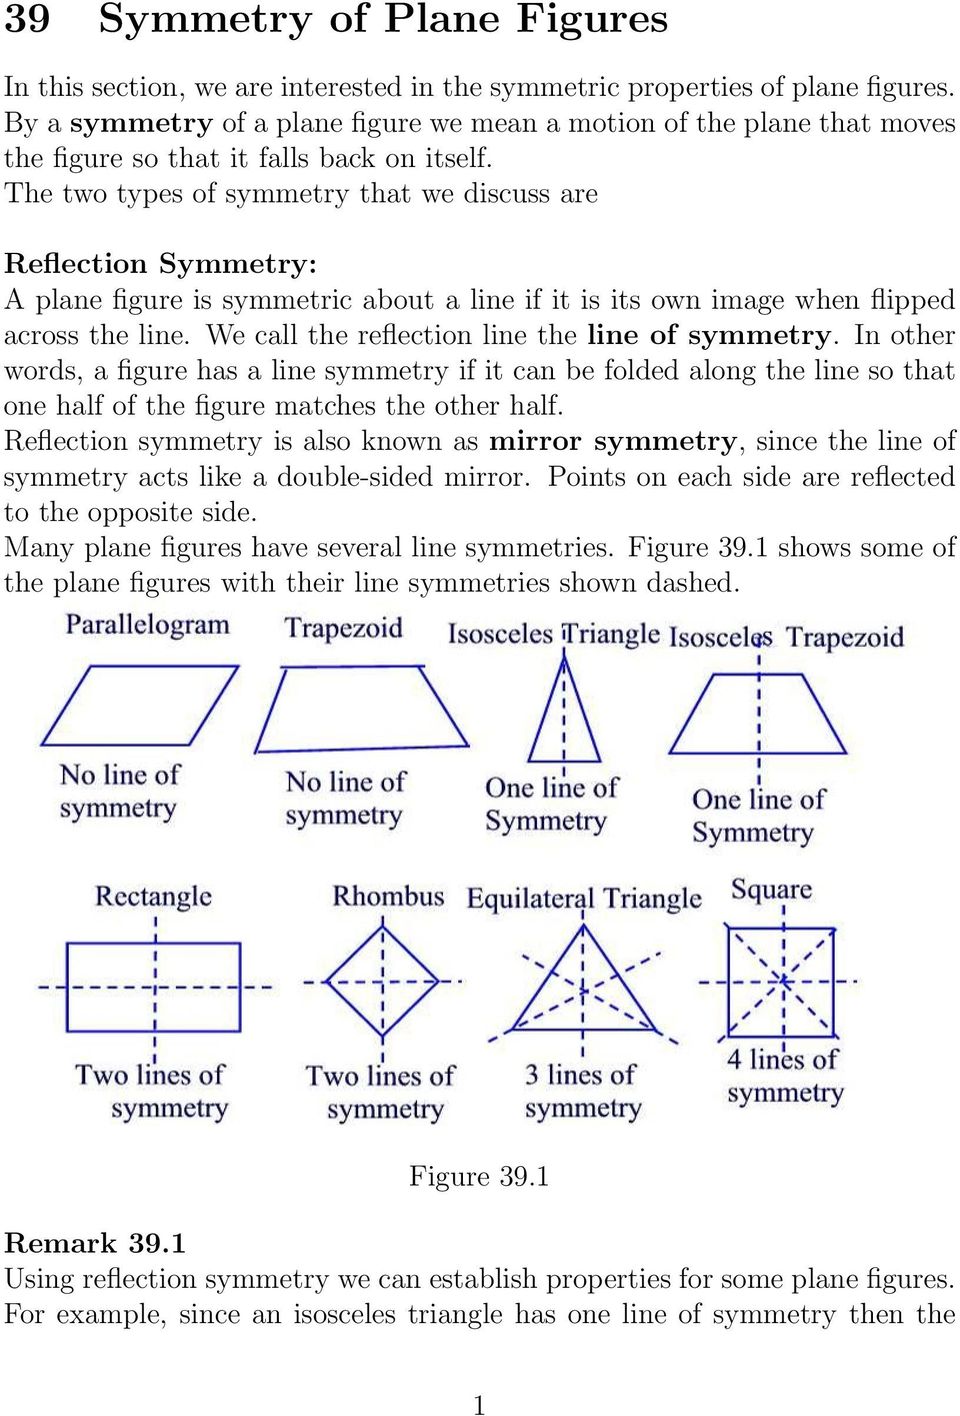 The two types of symmetry that we discuss are Reflection Symmetry: A plane figure is symmetric about a line if it is its own image when flipped across the line.